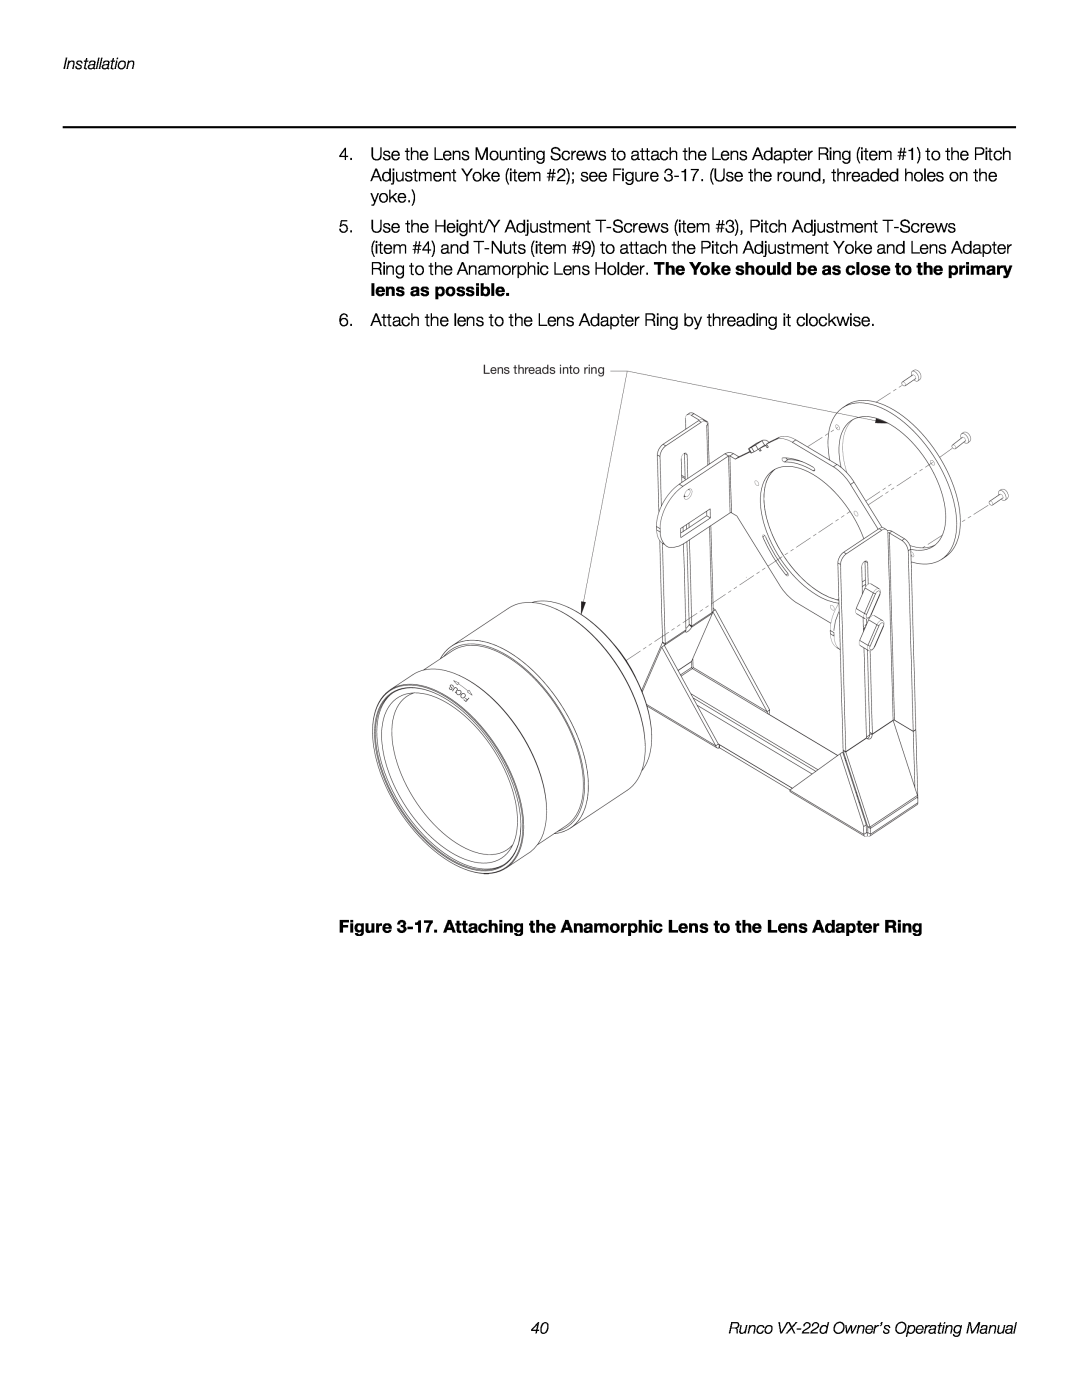 Runco VX-22D manual 17. Attaching the Anamorphic Lens to the Lens Adapter Ring 